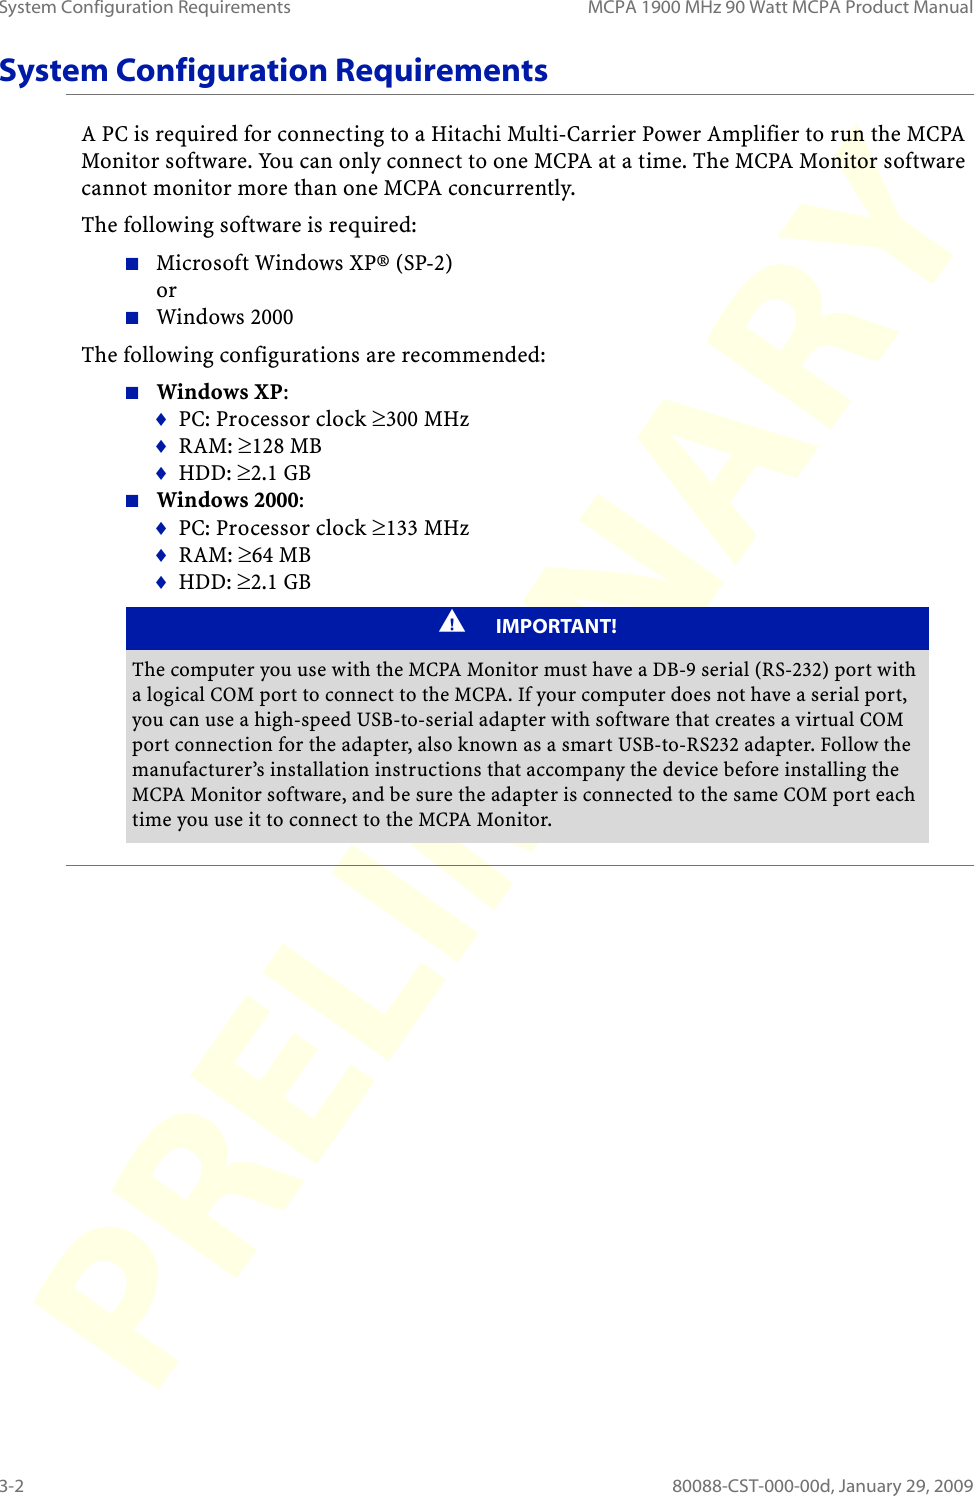 System Configuration Requirements MCPA 1900 MHz 90 Watt MCPA Product Manual3-2 80088-CST-000-00d, January 29, 2009System Configuration RequirementsA PC is required for connecting to a Hitachi Multi-Carrier Power Amplifier to run the MCPA Monitor software. You can only connect to one MCPA at a time. The MCPA Monitor software cannot monitor more than one MCPA concurrently.The following software is required:Microsoft Windows XP® (SP-2)  orWindows 2000The following configurations are recommended:Windows XP:PC: Processor clock ≥300 MHzRAM: ≥128 MBHDD: ≥2.1 GBWindows 2000:PC: Processor clock ≥133 MHzRAM: ≥64 MBHDD: ≥2.1 GBIMPORTANT!The computer you use with the MCPA Monitor must have a DB-9 serial (RS-232) port with a logical COM port to connect to the MCPA. If your computer does not have a serial port, you can use a high-speed USB-to-serial adapter with software that creates a virtual COM port connection for the adapter, also known as a smart USB-to-RS232 adapter. Follow the manufacturer’s installation instructions that accompany the device before installing the MCPA Monitor software, and be sure the adapter is connected to the same COM port each time you use it to connect to the MCPA Monitor.